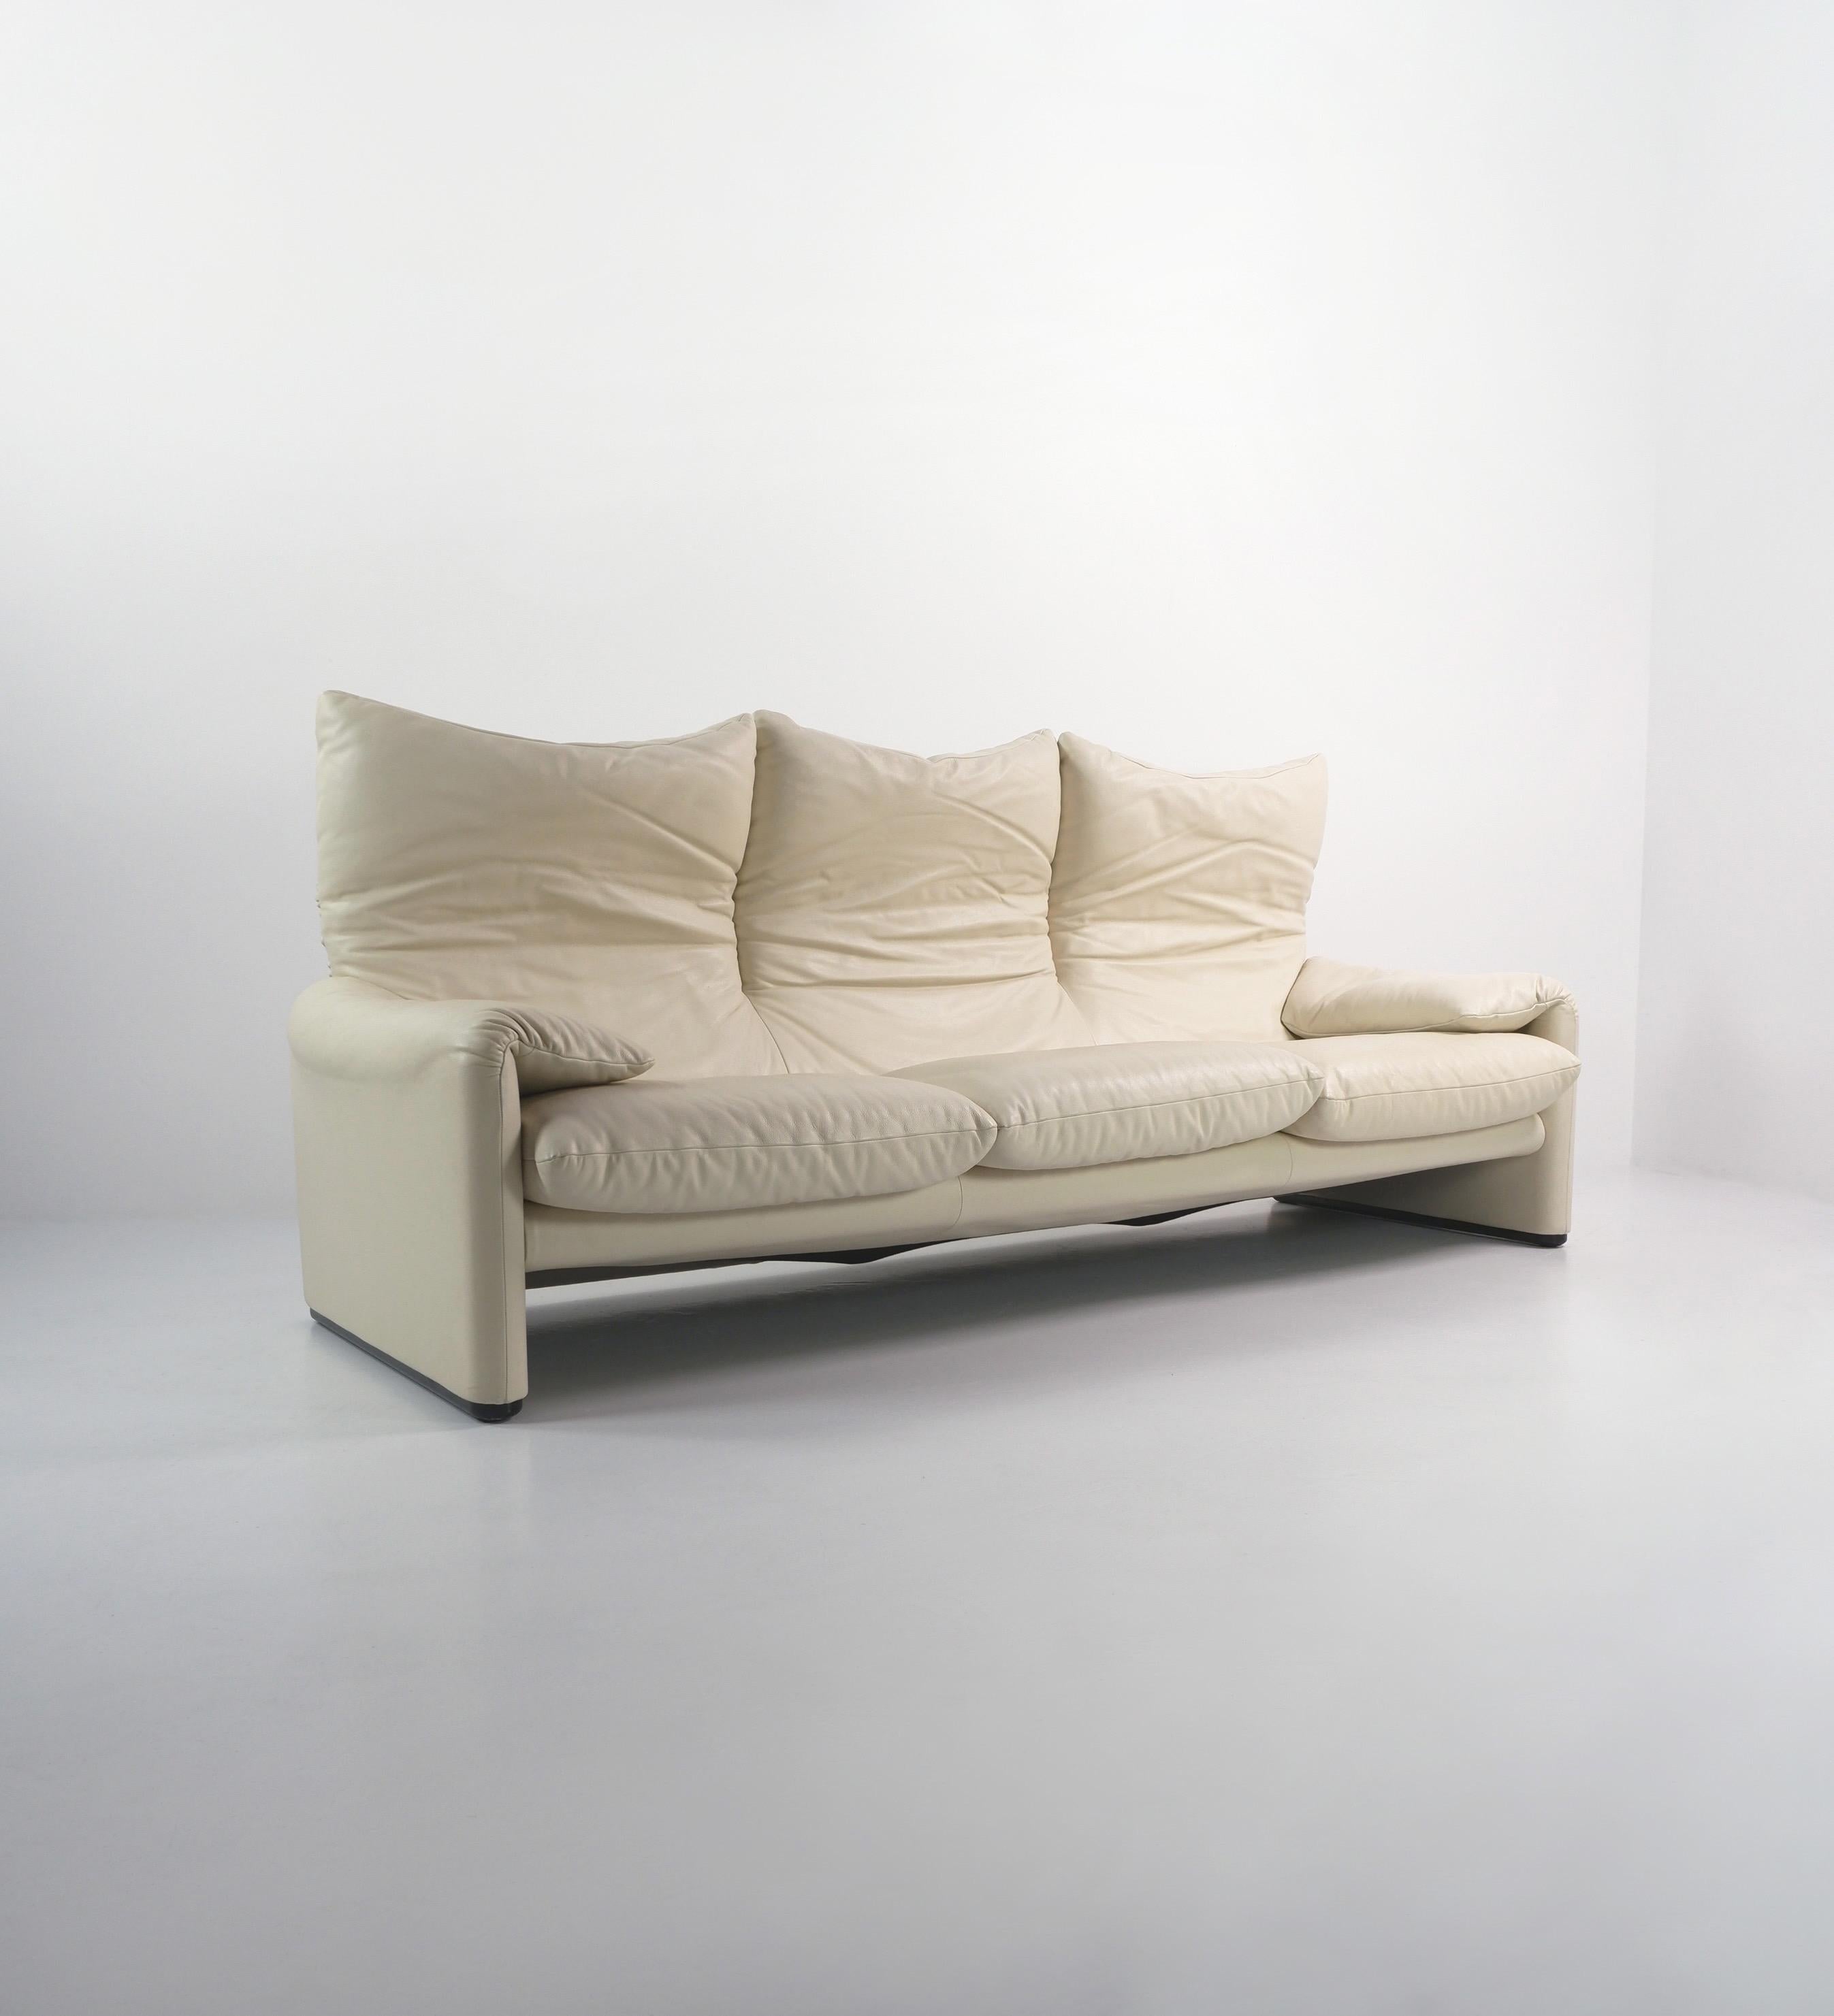 A late 20th century Maralunga sofa designed by Vico Magistretti and produced by Cassina, c.1990. Featuring Cassina's wonderfully luxurious Italian leather in ivory and adjustable backrest.
 